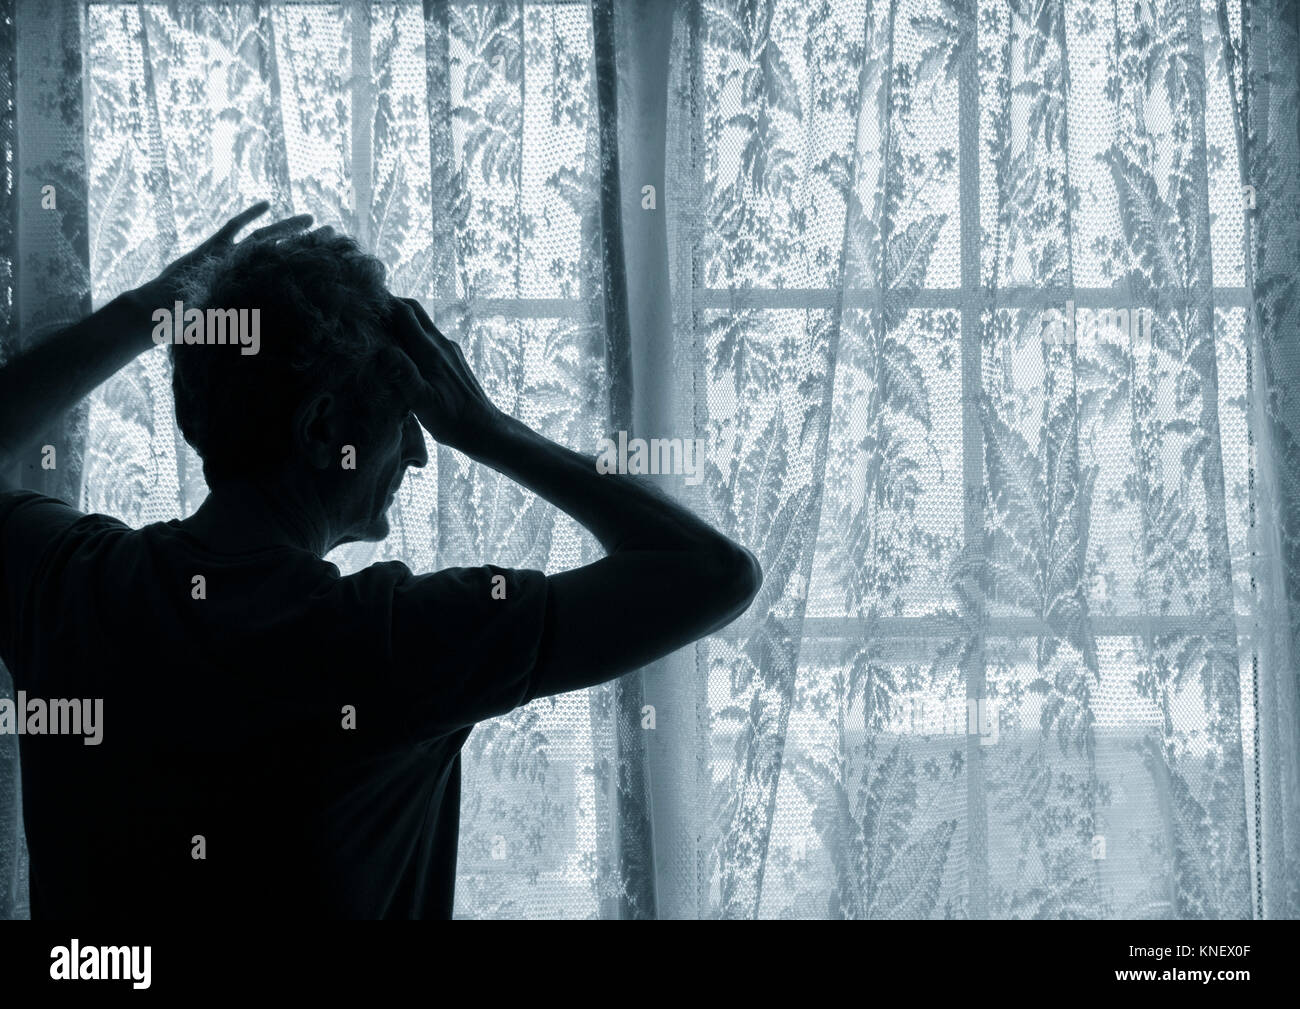 Mature man with hand on head near window. Concept image for depression, male depression, mental health, male suicide... Stock Photo